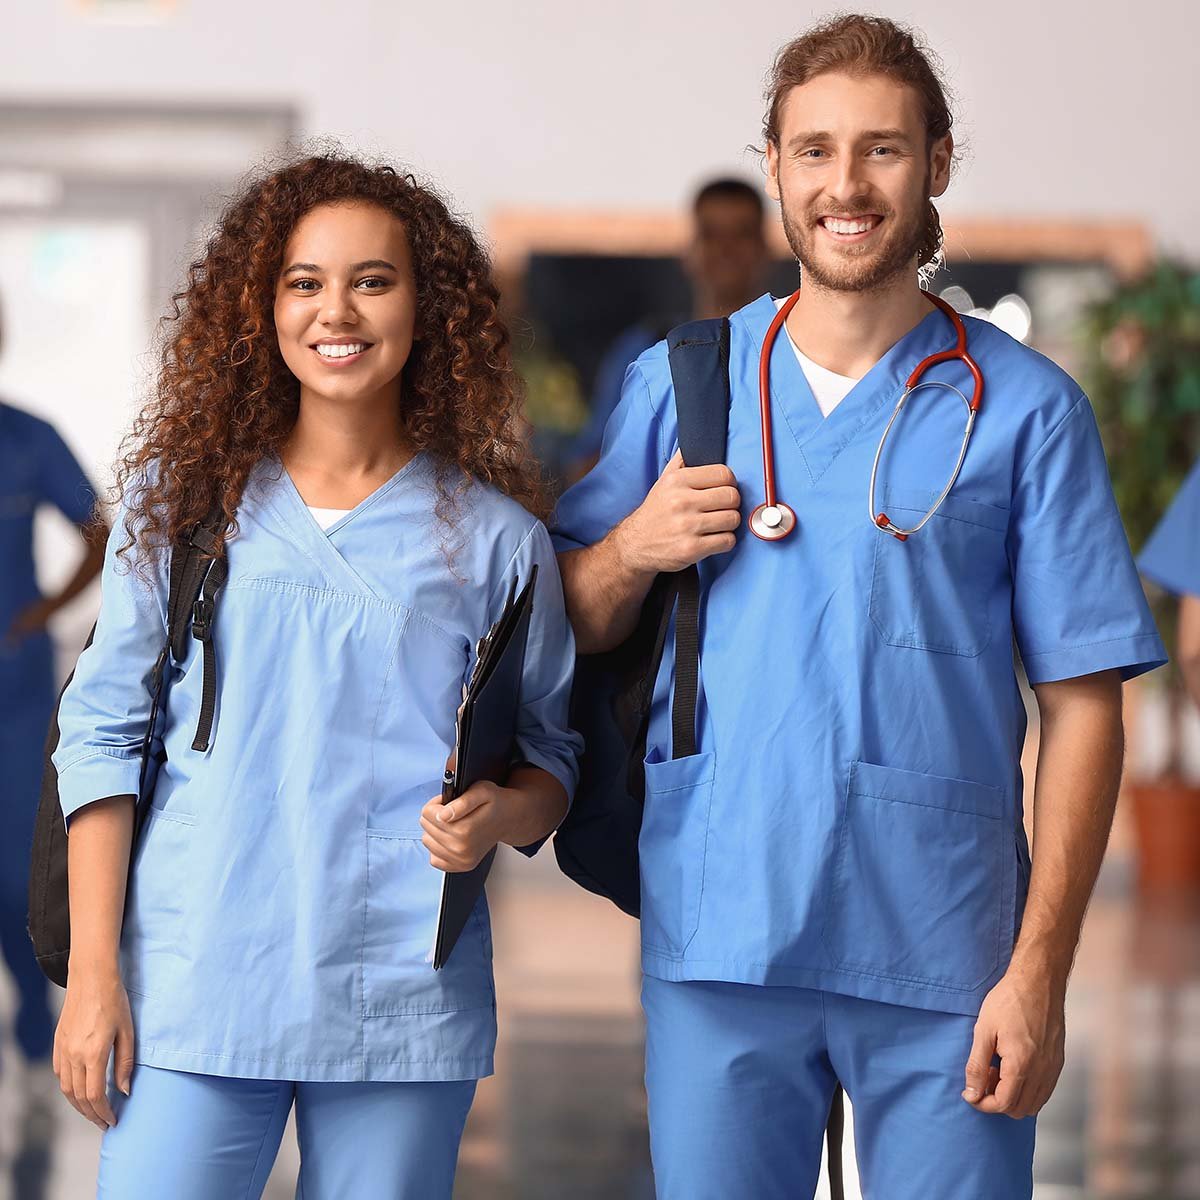 Two nursing student smile while standing in a hallway.